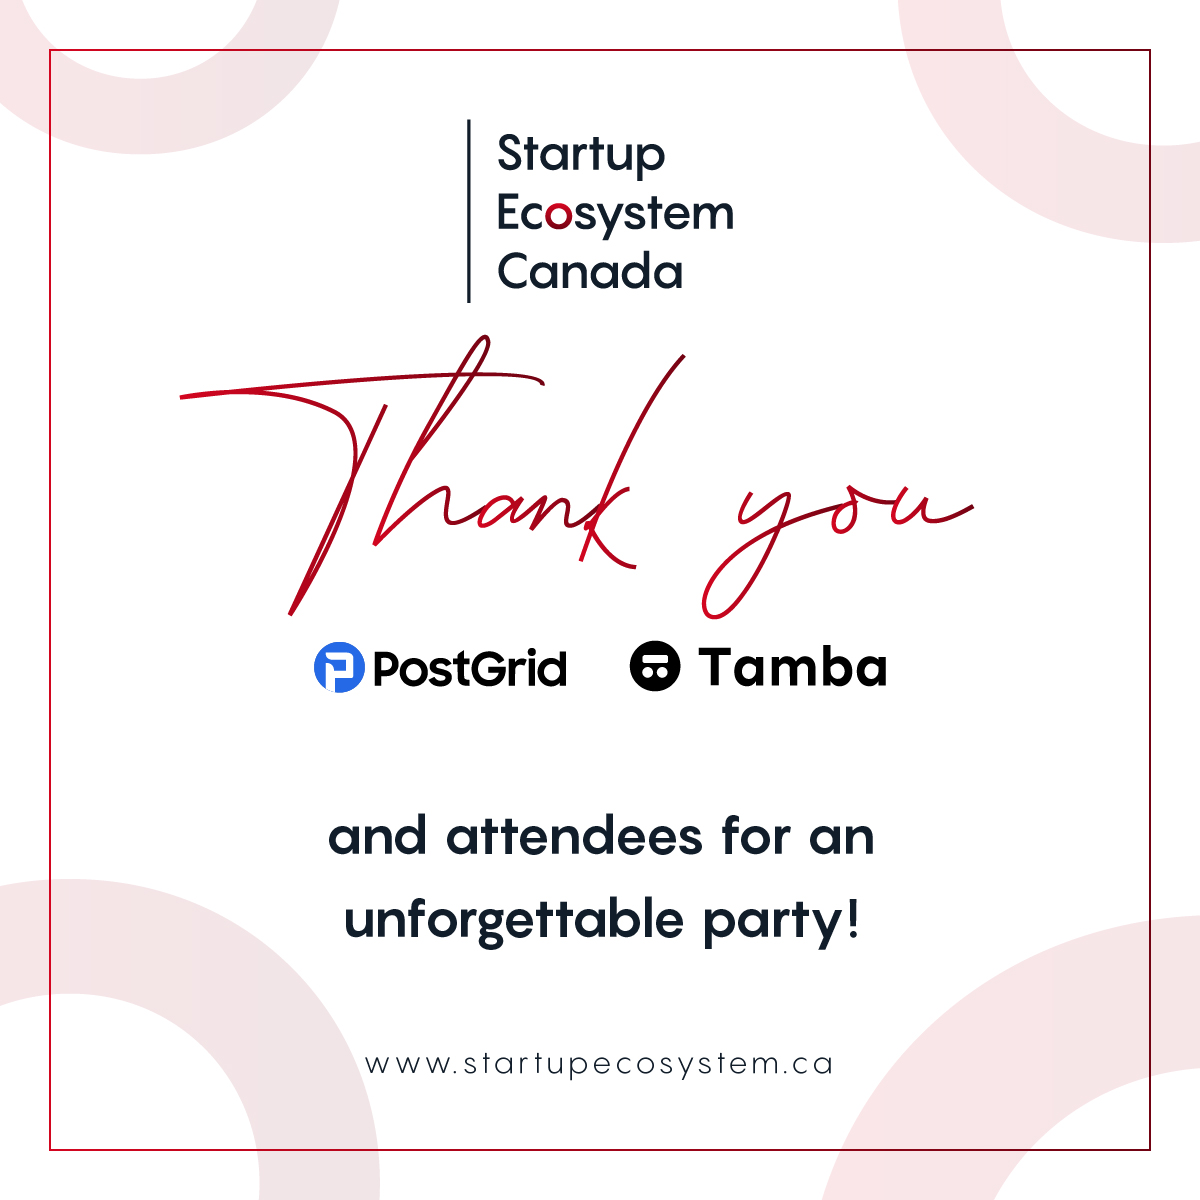 Cheers to our incredible co-hosts and the wonderful attendees for making this journey unforgettable! Your support and presence made all the difference. 

#torontoparty #startupparty #networking